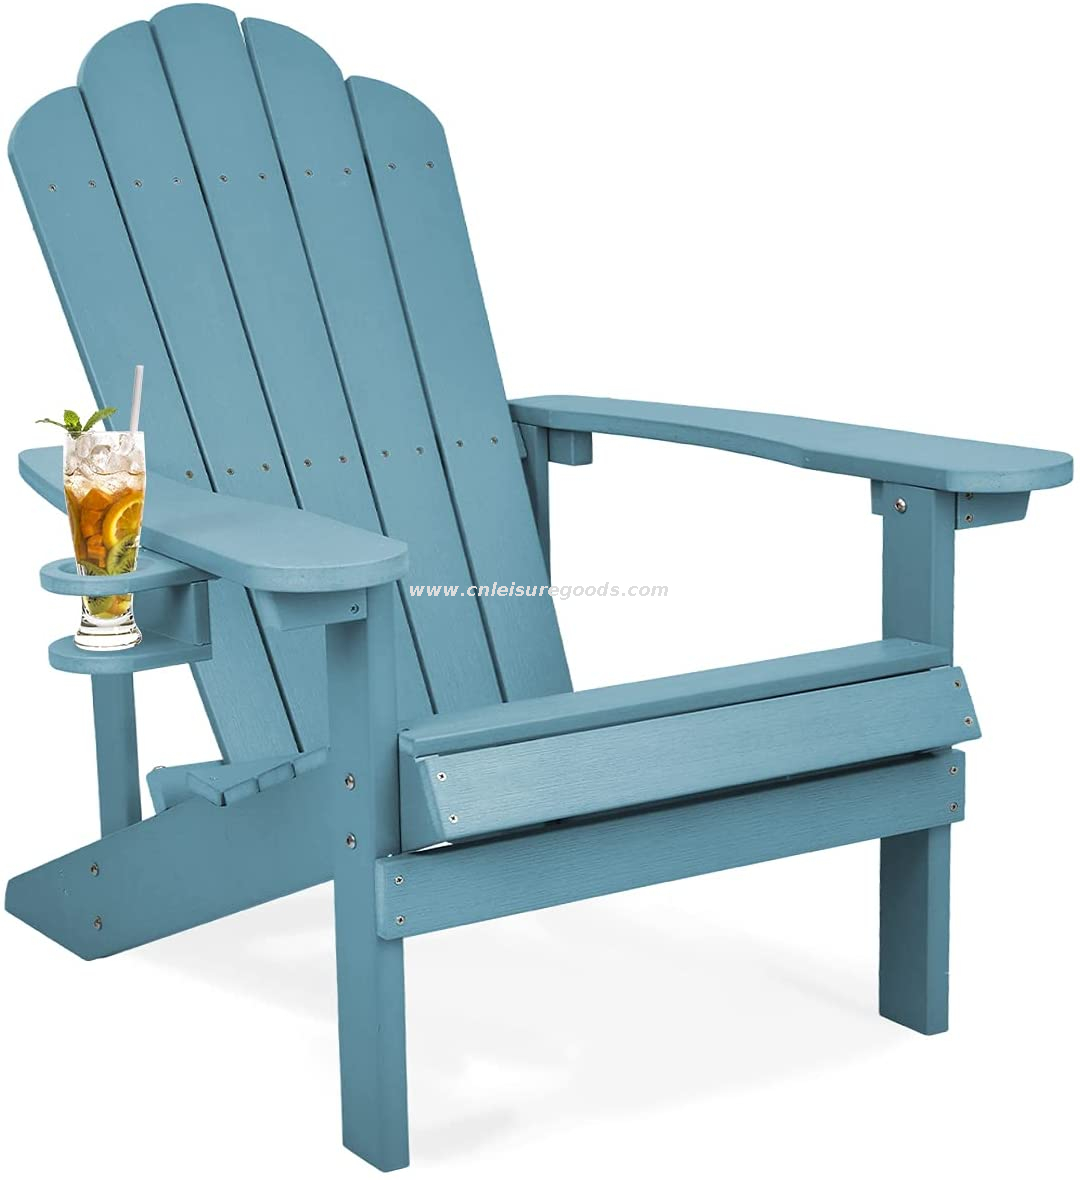 Uplion Kd Weather Resistant Chair With Cup Holder Patio Lawn Garden Backyard Plastic Adirondack Chair